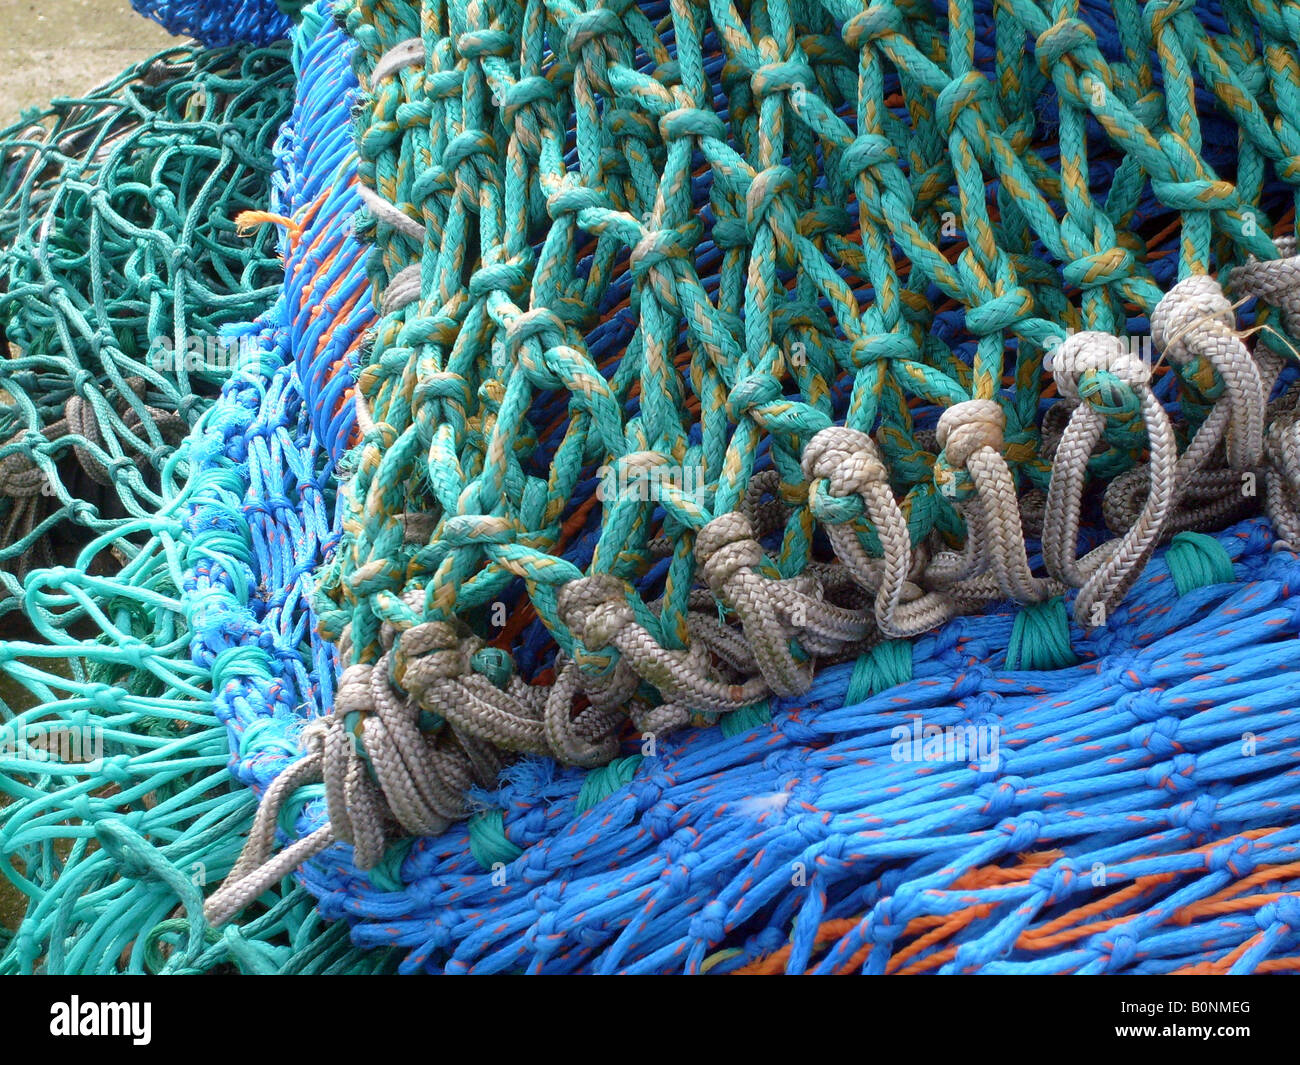 Details of colorful fishing nets, Scarborough, harbour, England. Stock Photo